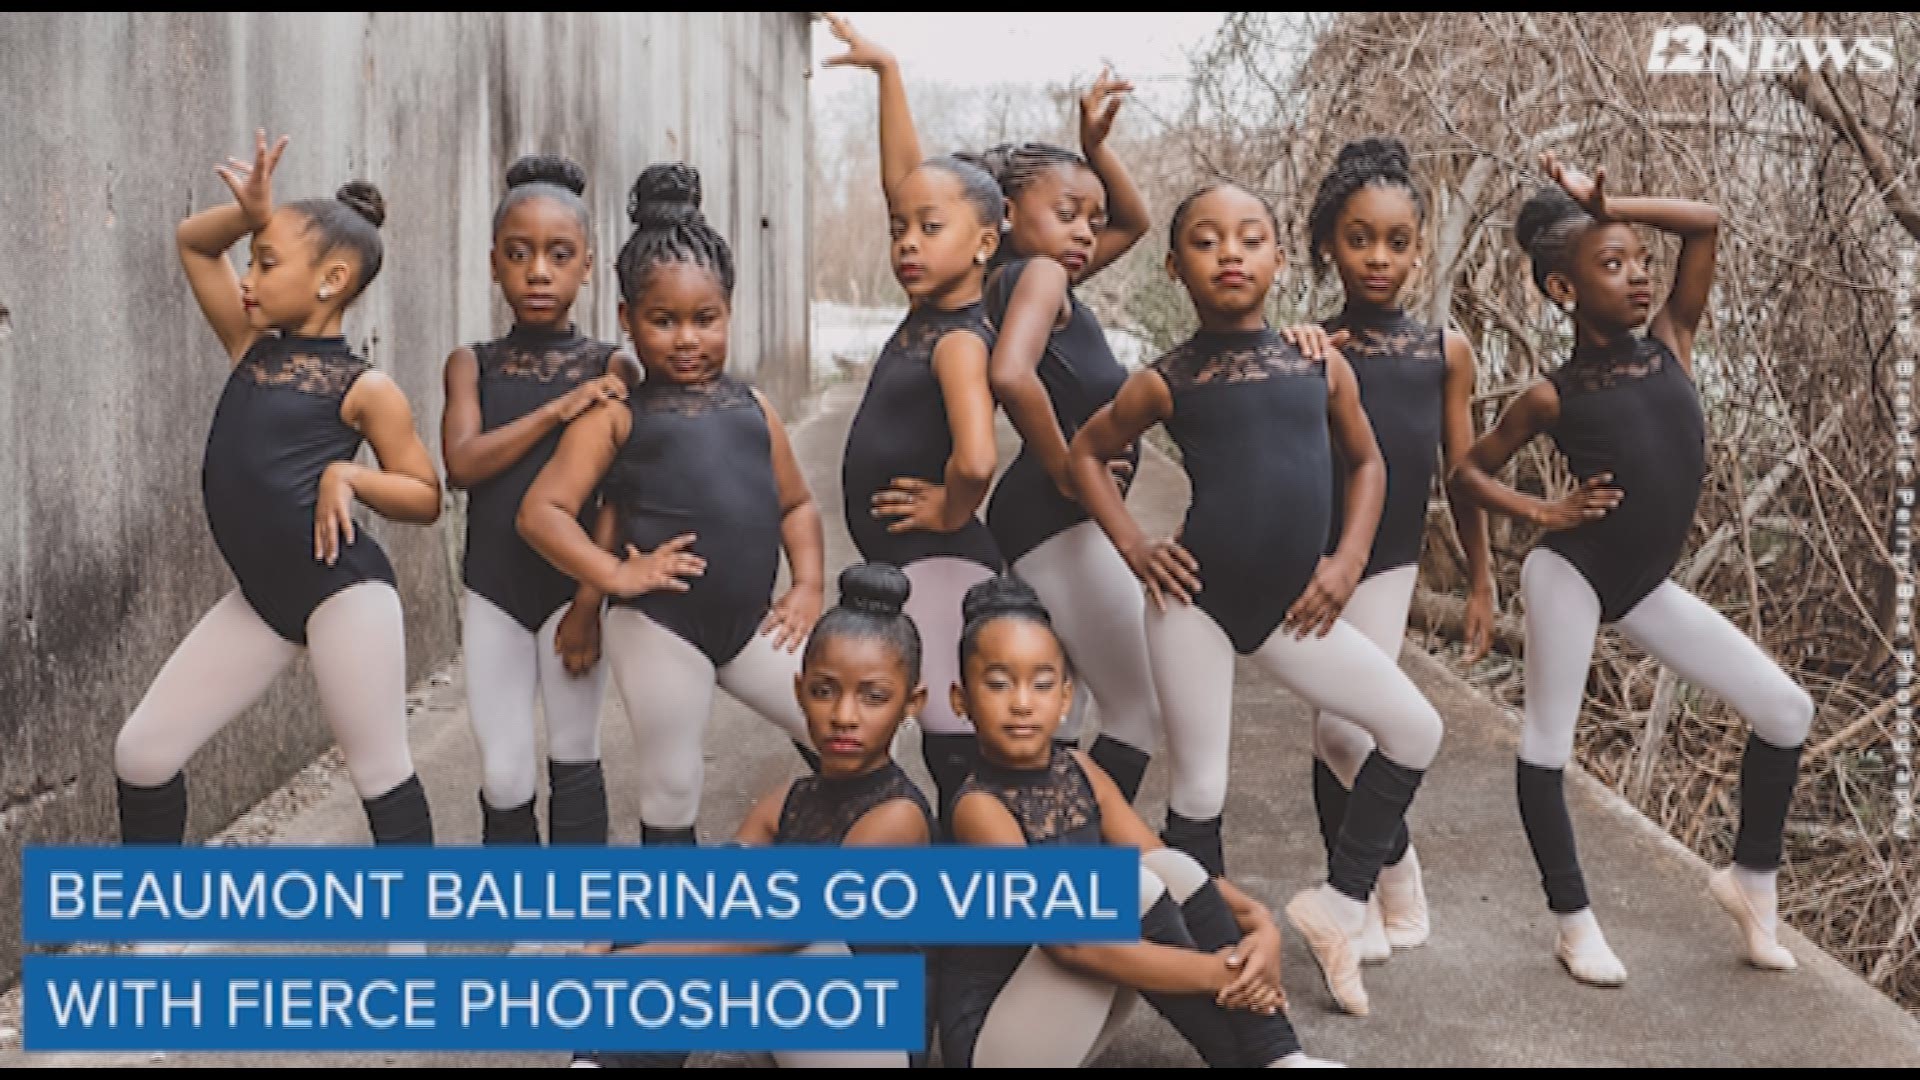 A group of tiny dancers from Southeast Texas is getting attention from around the world after their recent photoshoot went viral on Facebook.